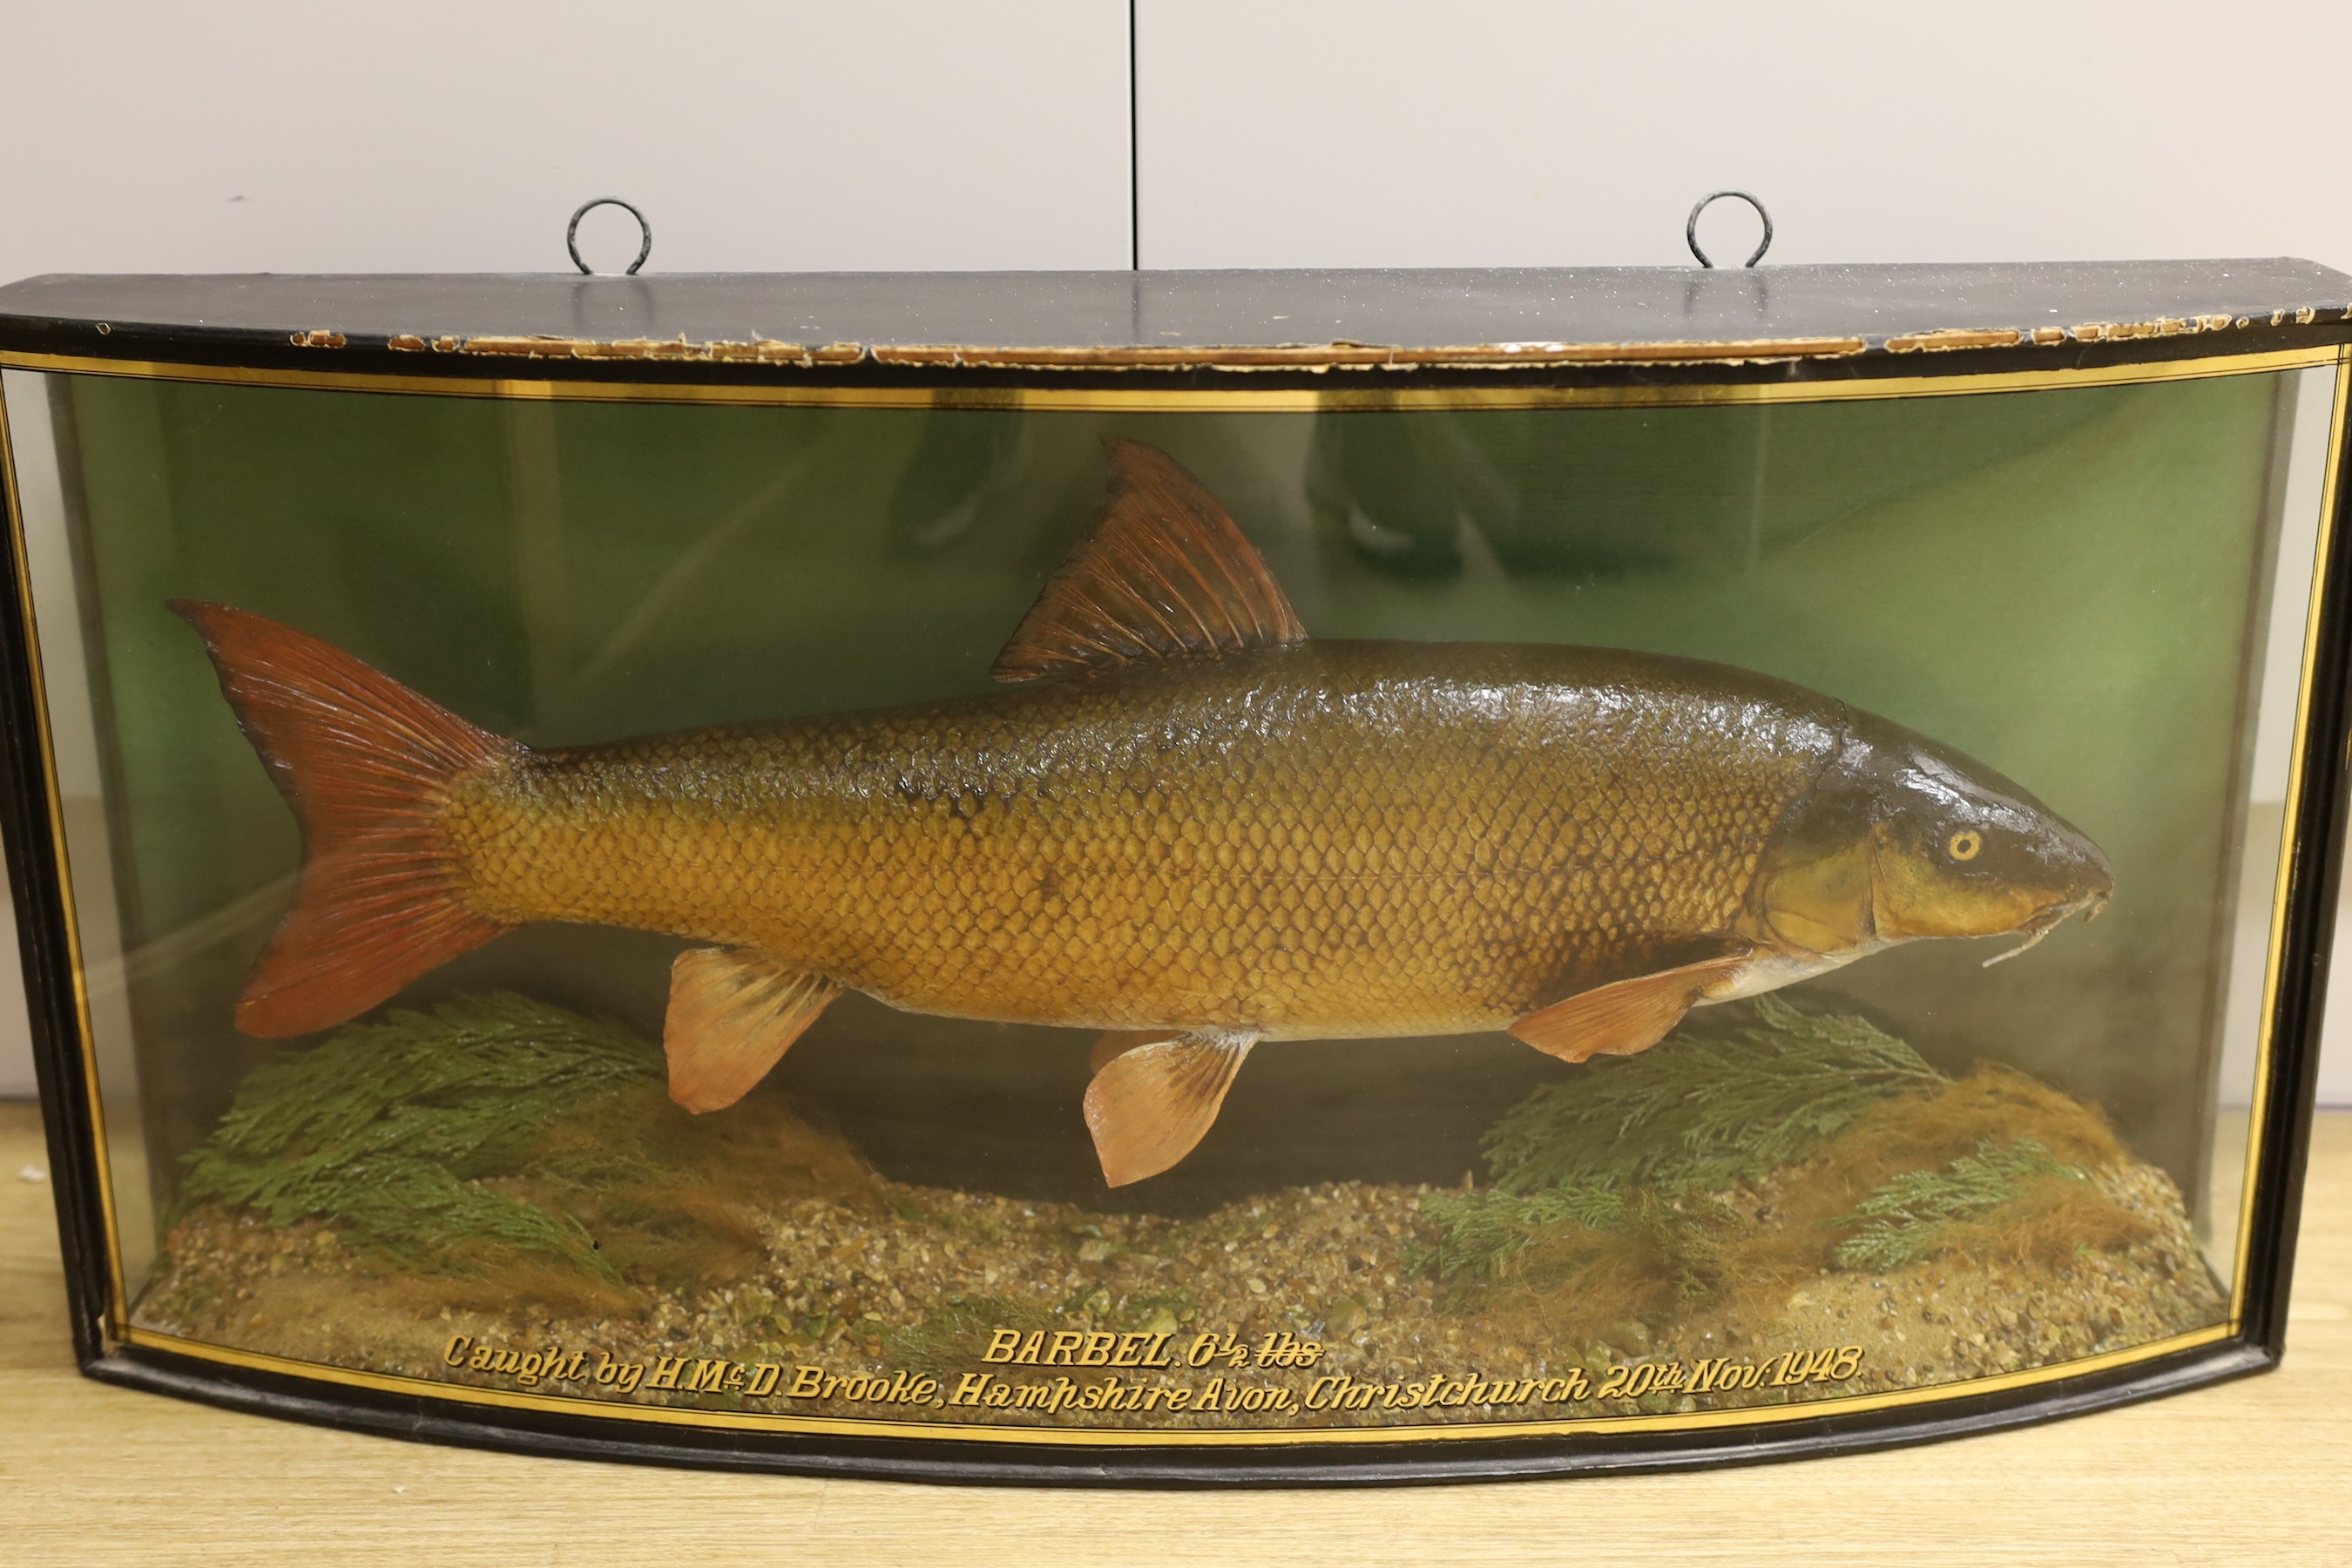 A cased taxidermic barbel, 1948, caught by H. Mc.D Brooke, Christchurch, preserved by J. Cooper & - Image 2 of 2